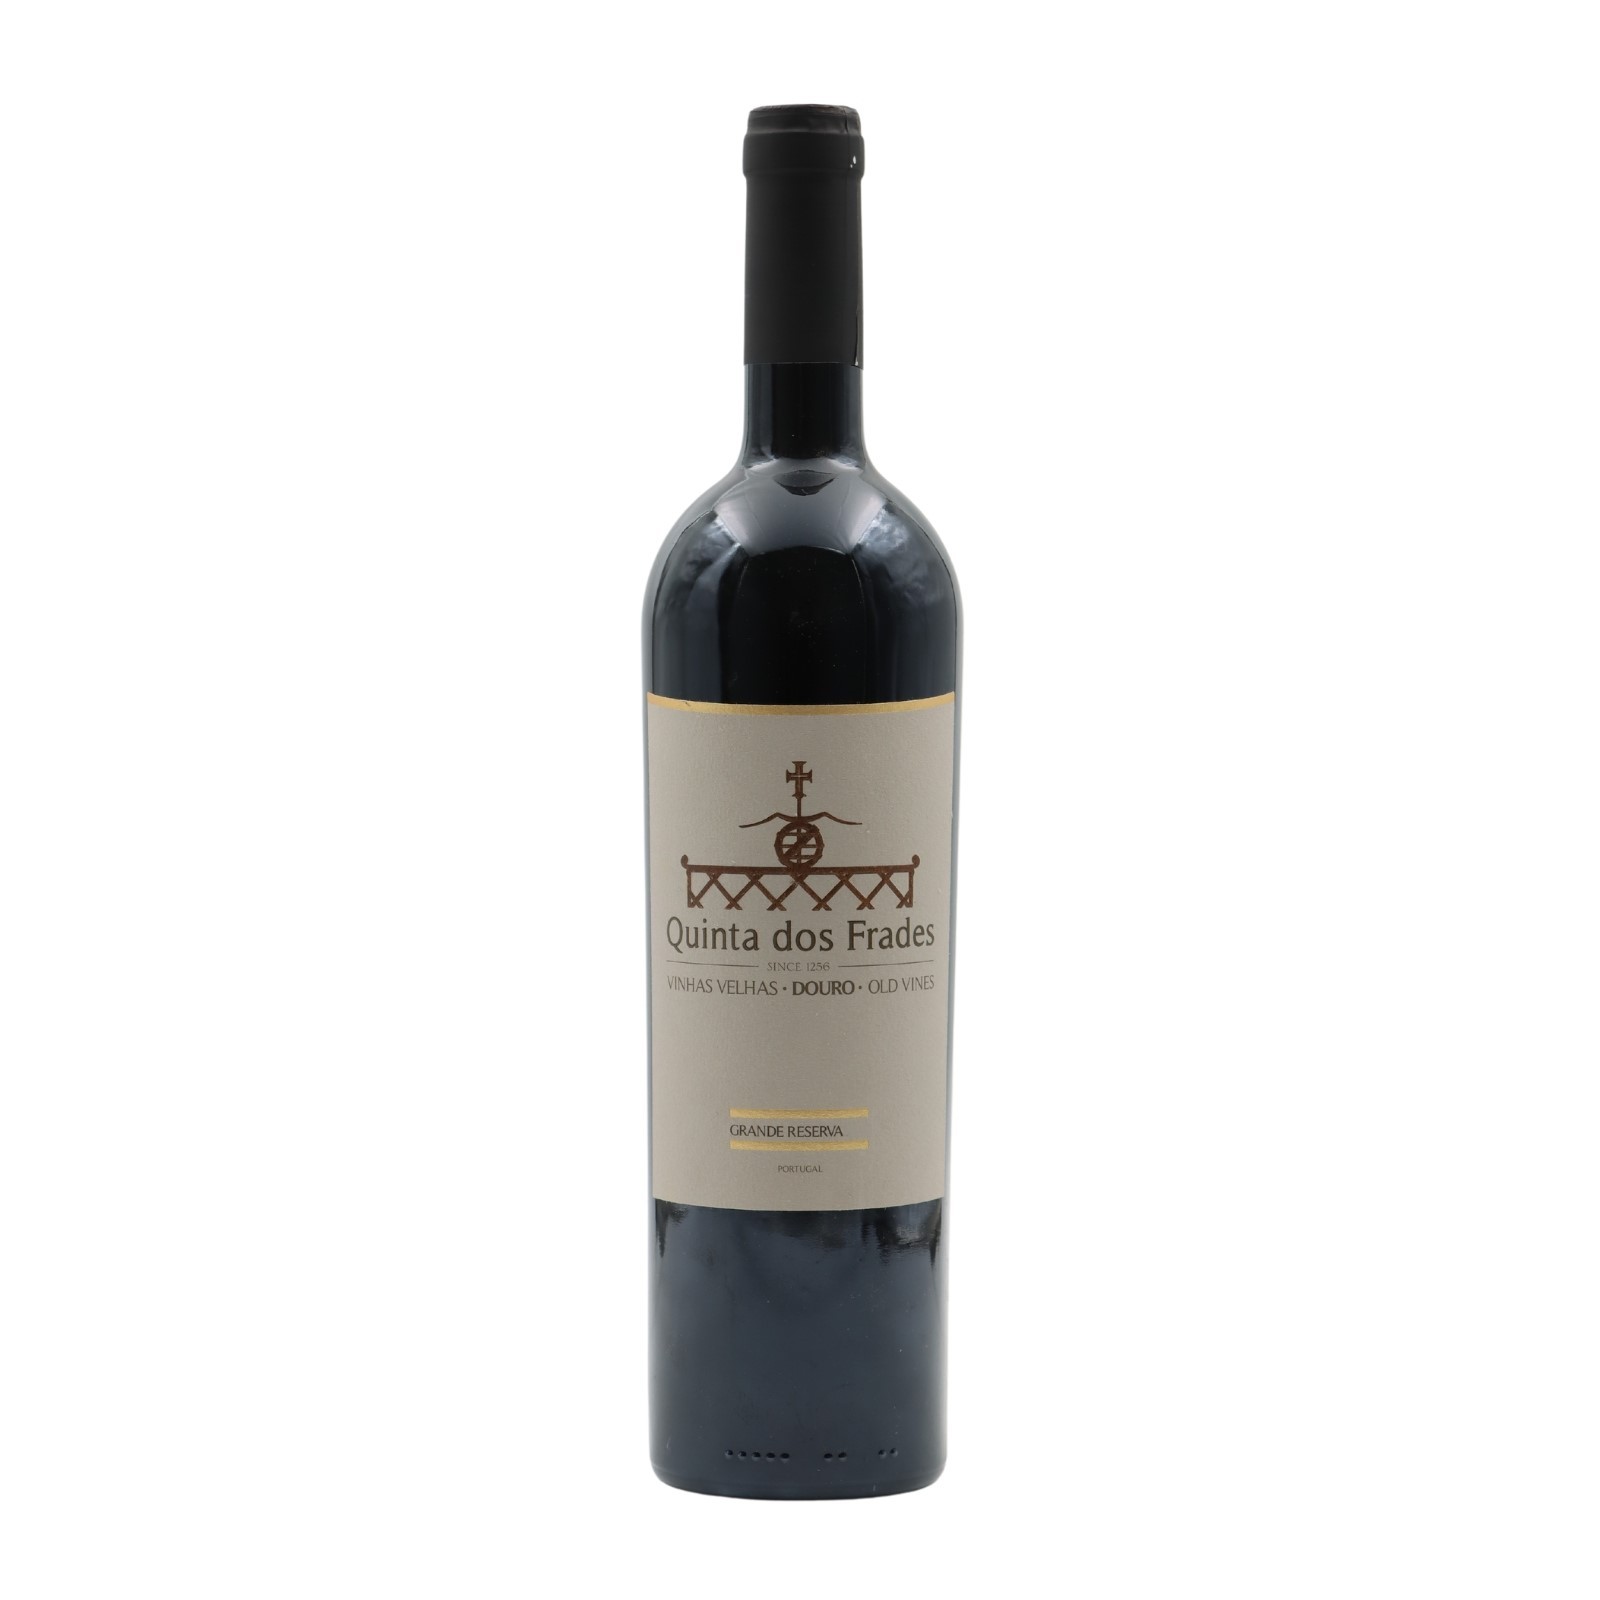 Quinta dos Frades Old Vines Grand Reserve Rot 2015